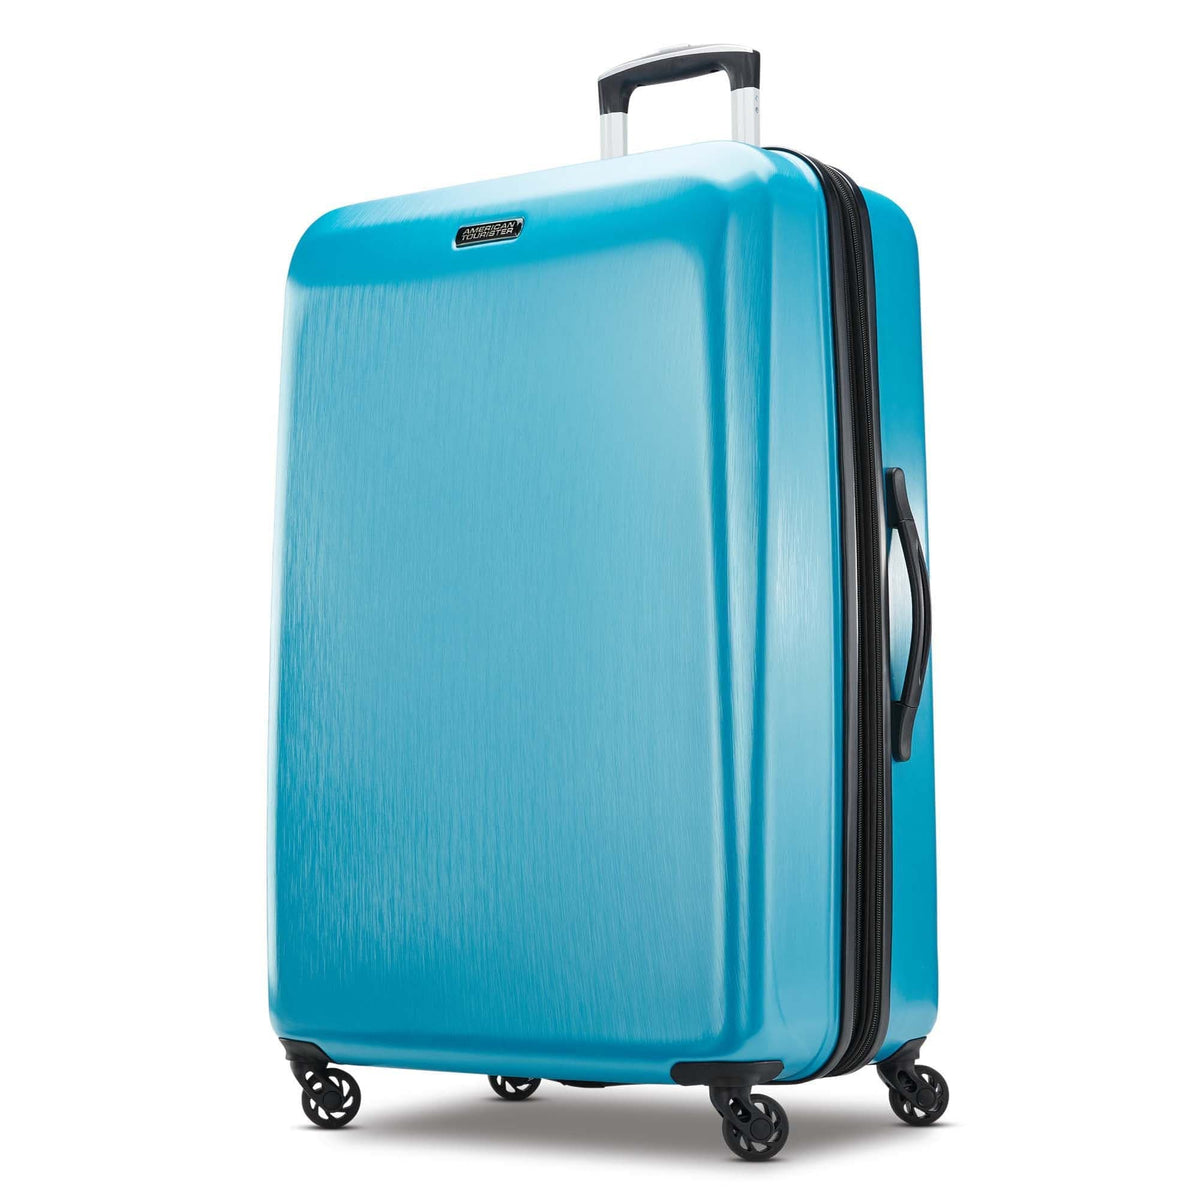 American Tourister Moonlight 28 Spinner Luggage